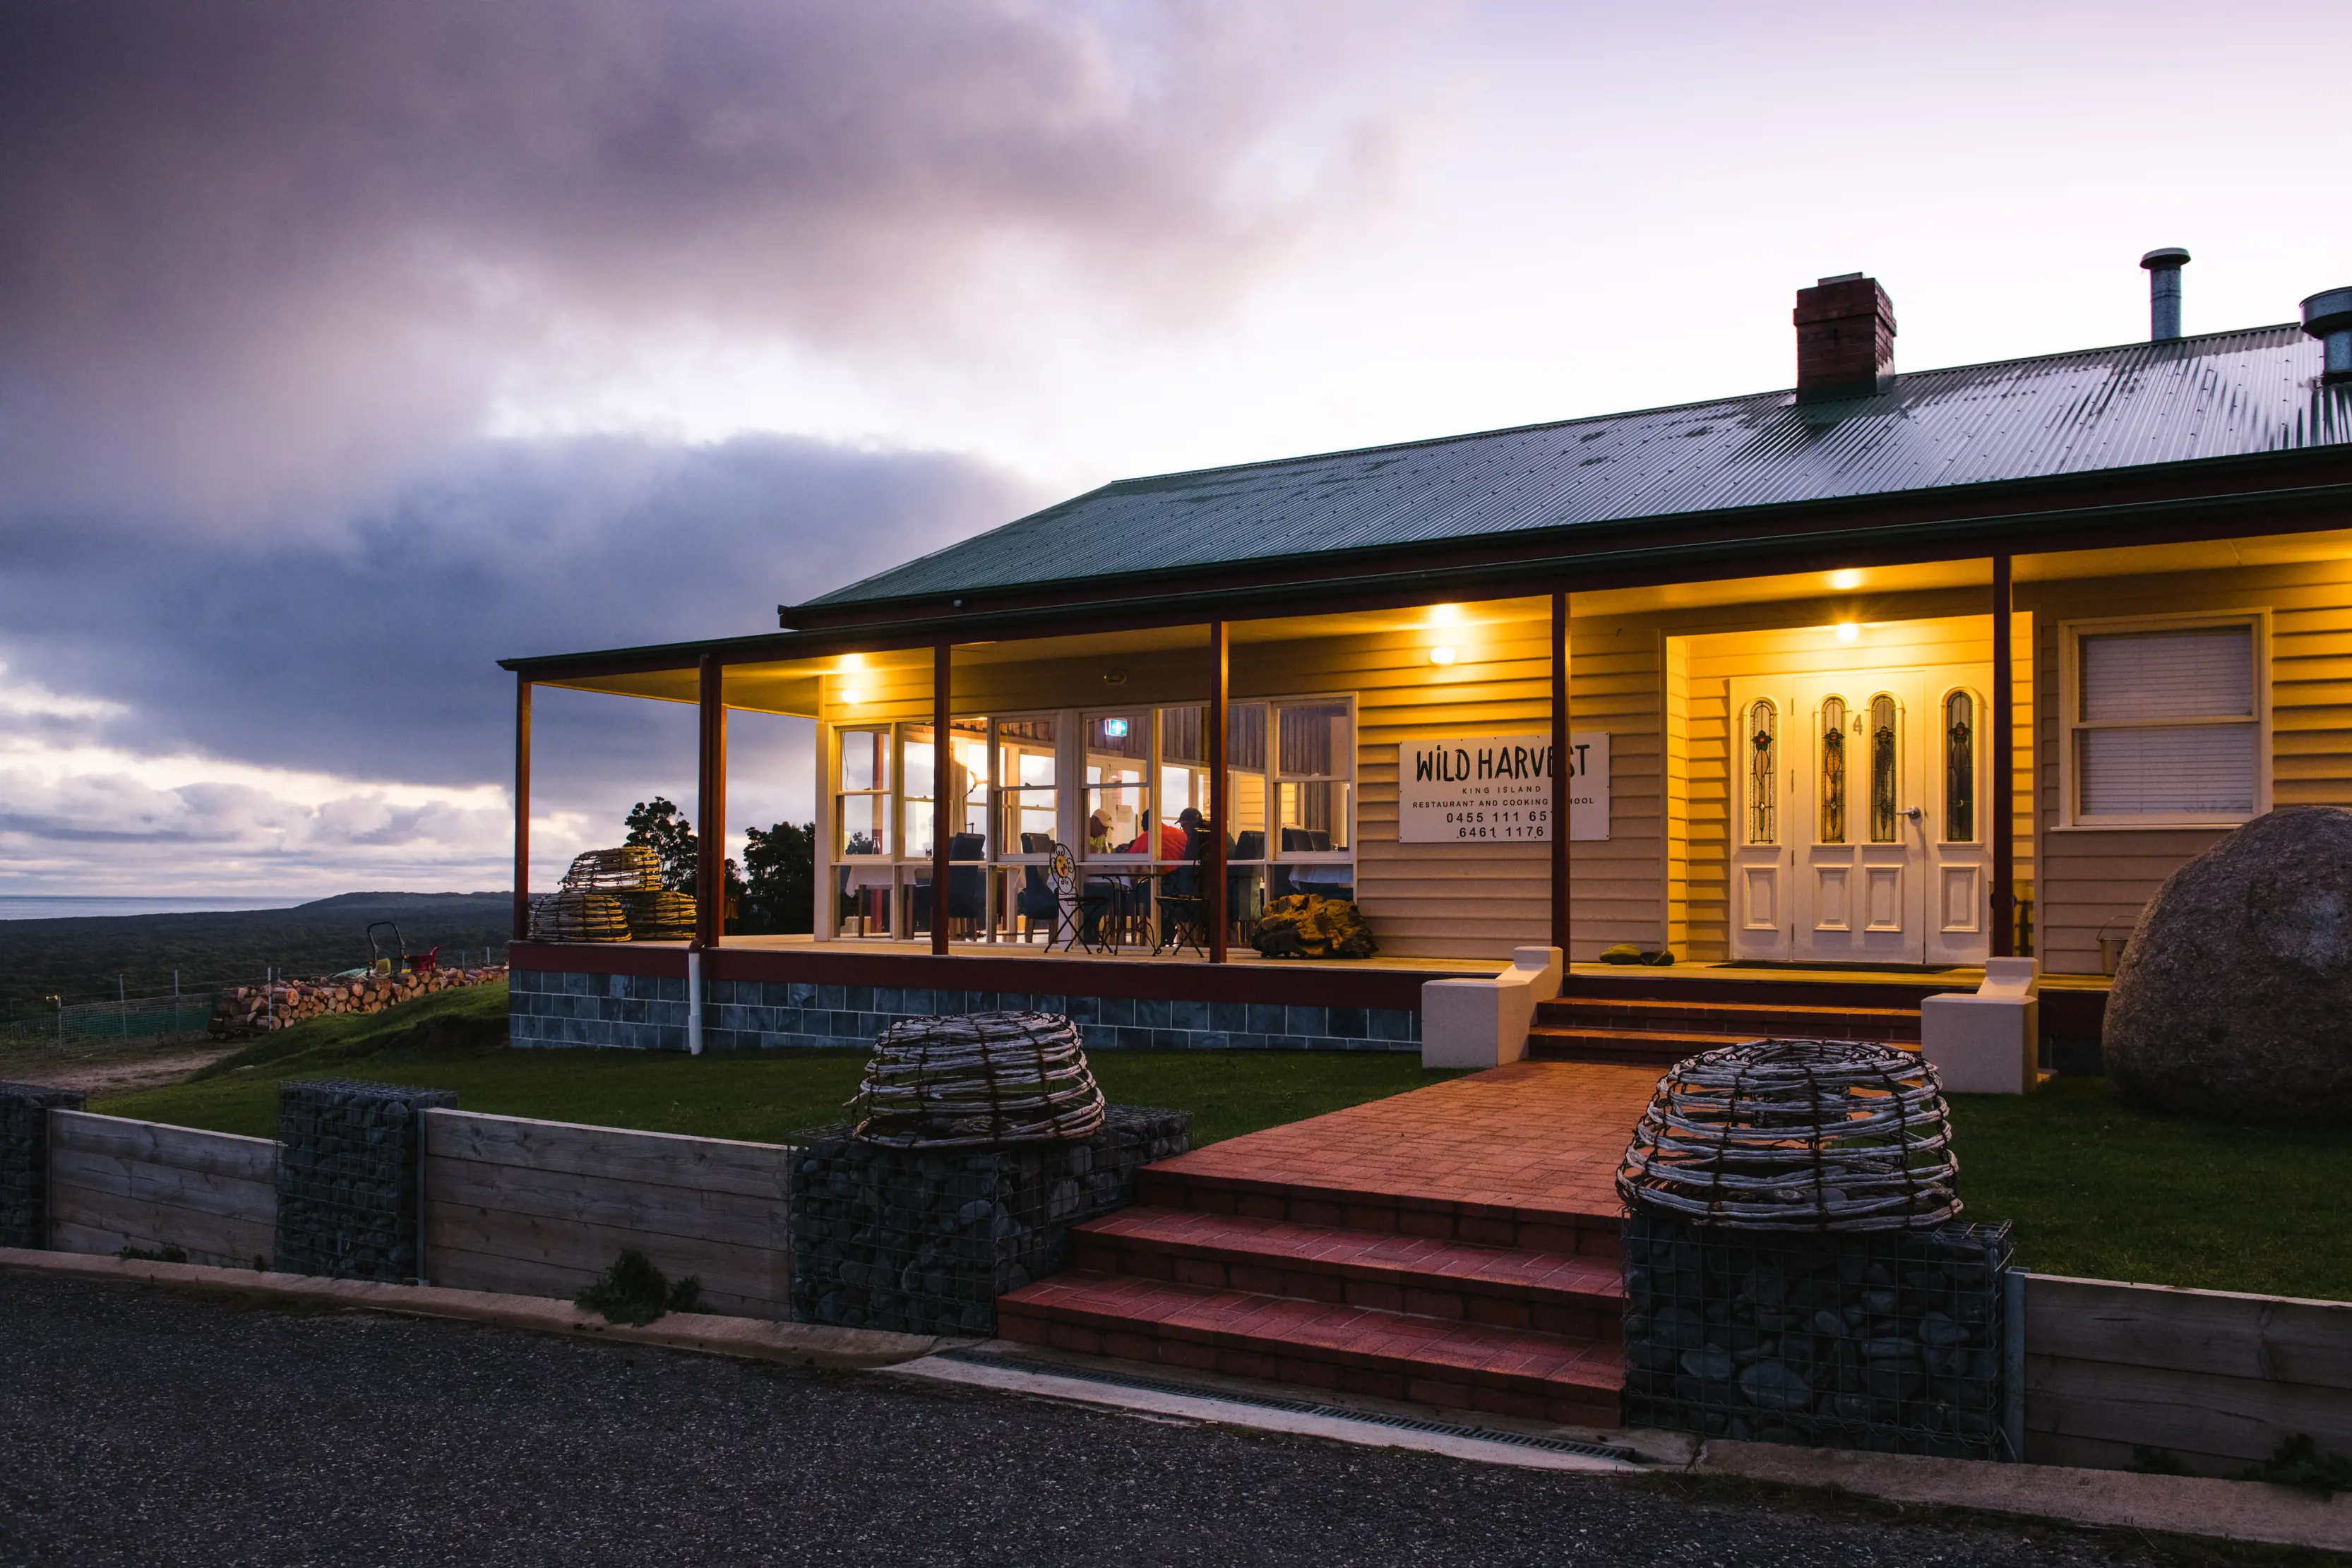 Incredible image of Wild Harvest Restaurant and Cooking School, a fine dining restaurant, taken at dusk.